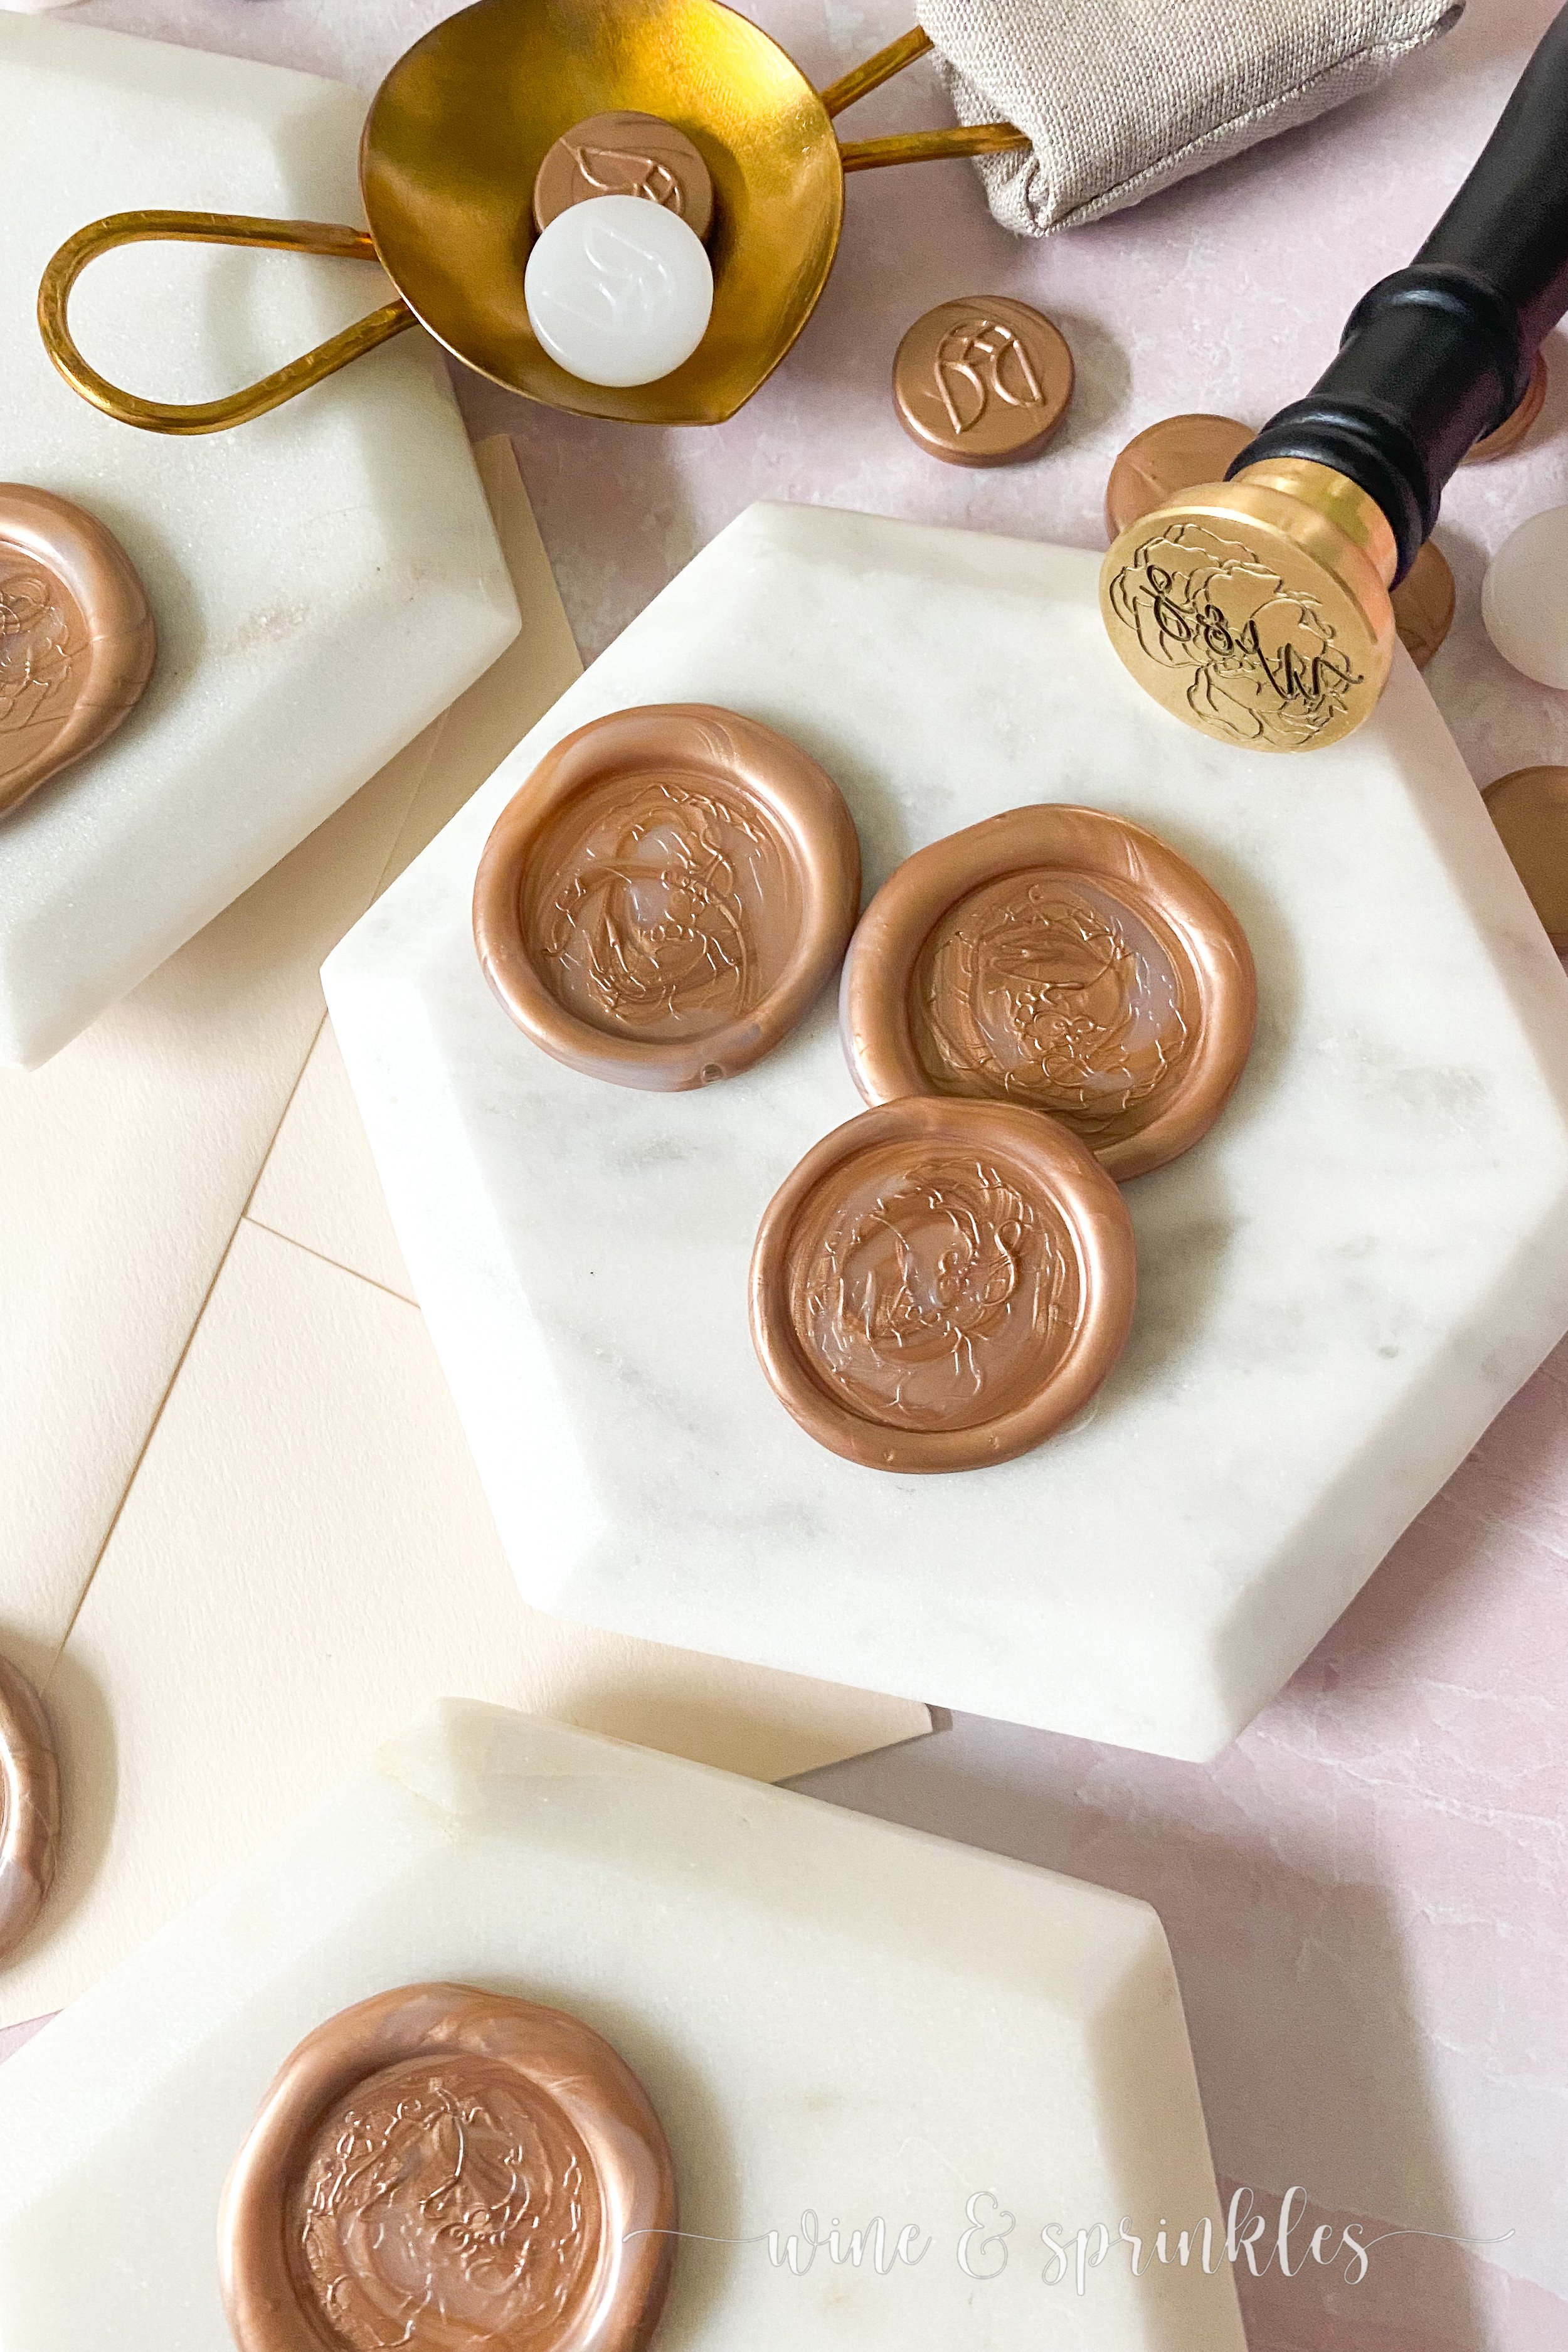 Nostalgic Impressions Wedding Custom Wax Seal Stamp Kit with Floral Edge,  Wedding Couple Initials & mailable Sealing Wax